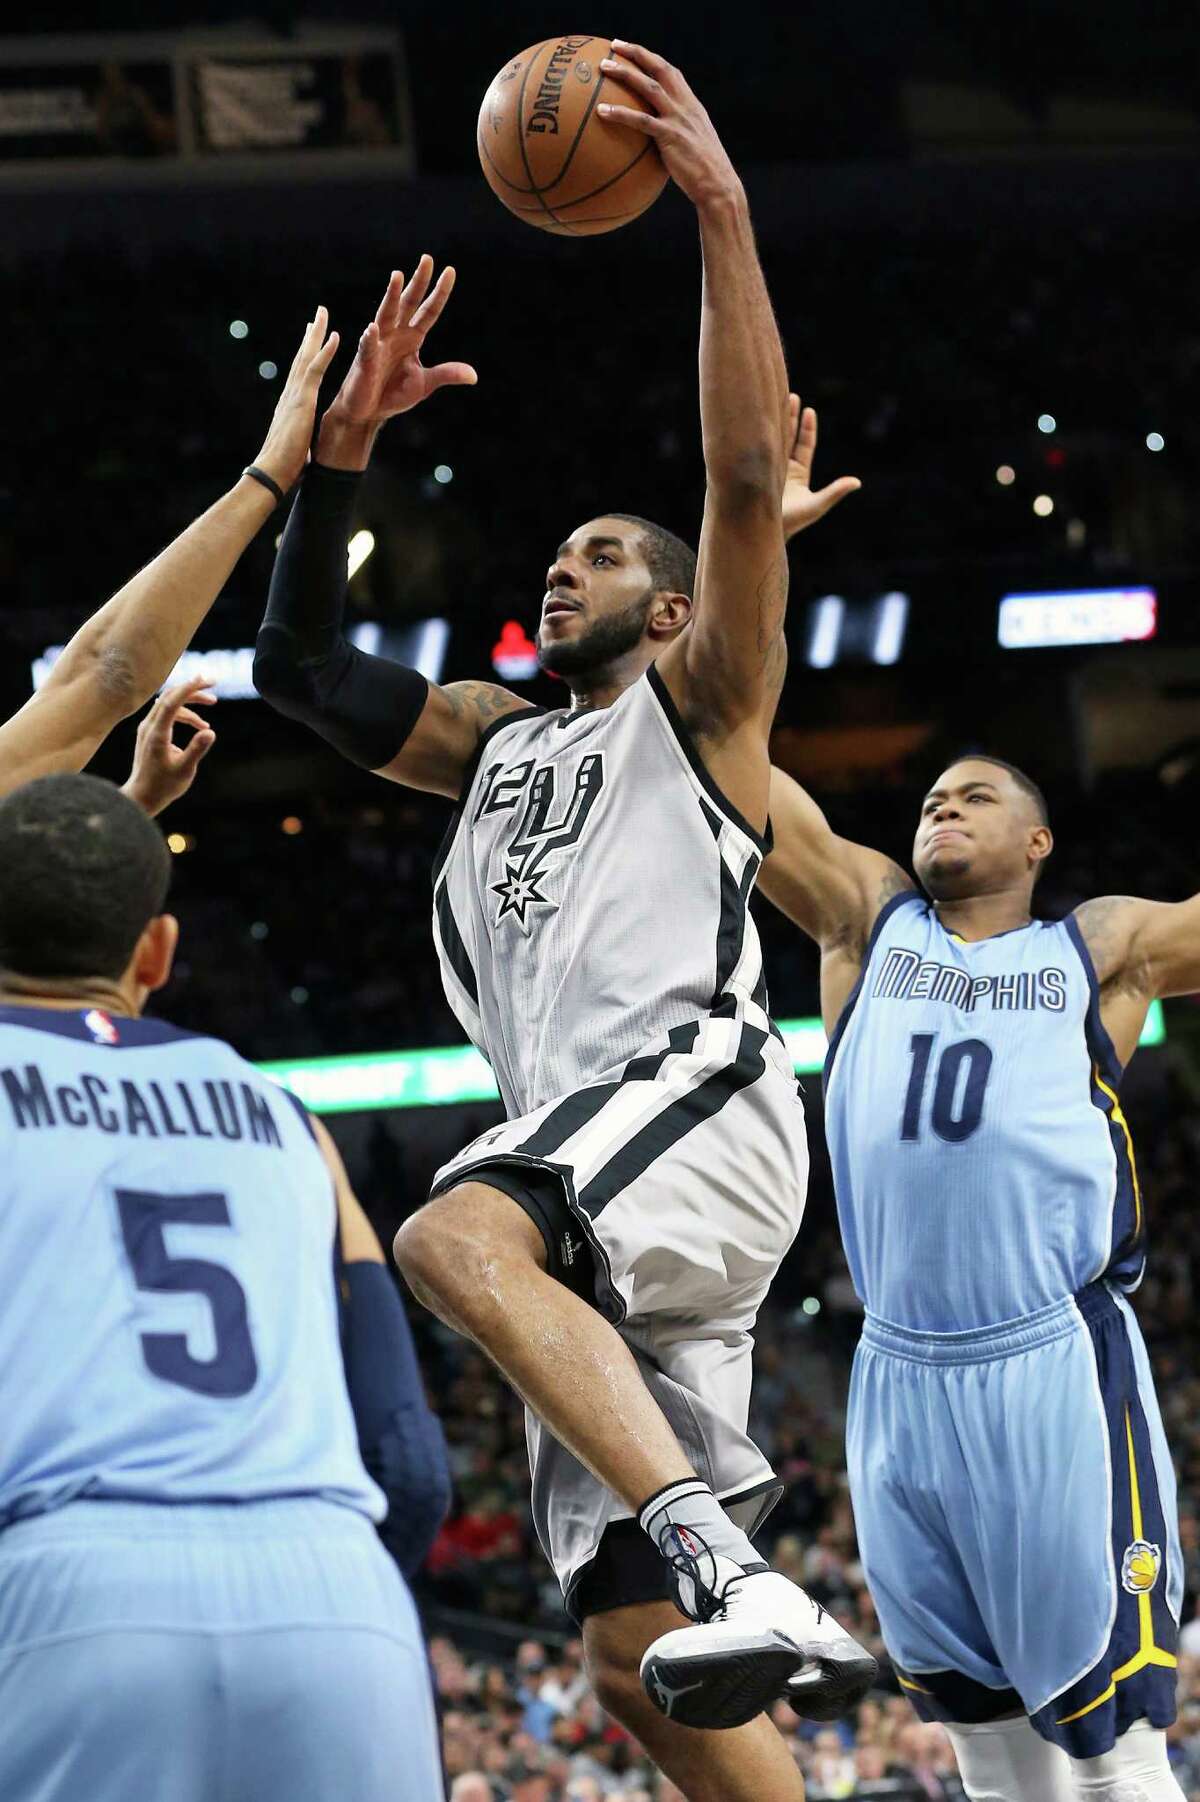 LaMarcus Aldridge gets by Jerell Martin as the Spurs host the Grizzlies at the AT&T Center on March 25, 2016.